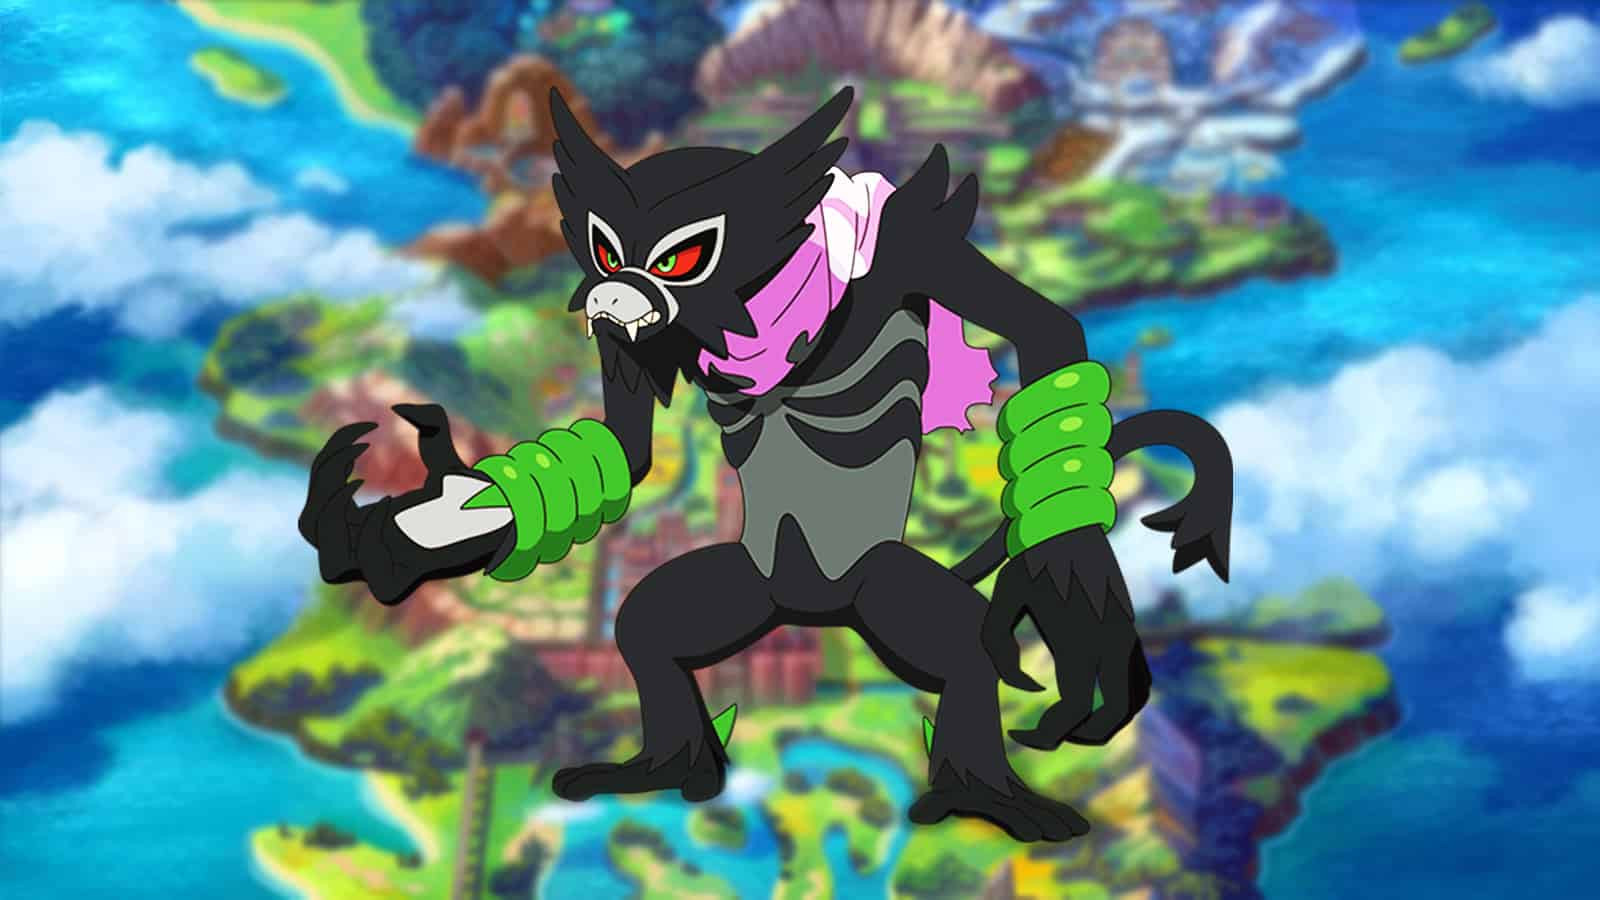 Pokemon Sword & Shield players outraged over new Zarude form - Dexerto